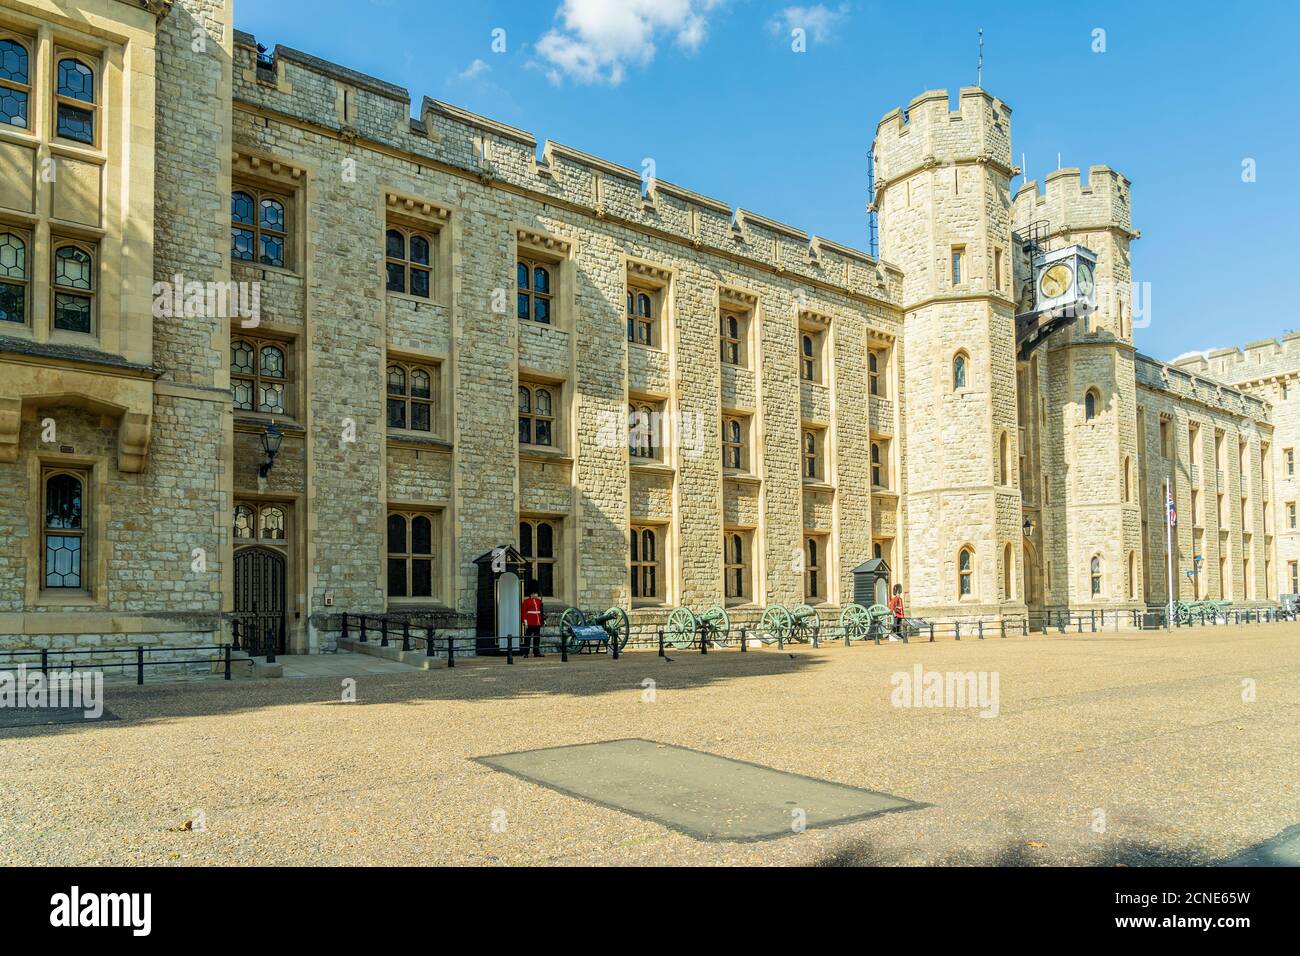 Queens Guards at Jewel House, The Tower of London, UNESCO World Heritage Site, London, England, United Kingdom, Europe Stock Photo